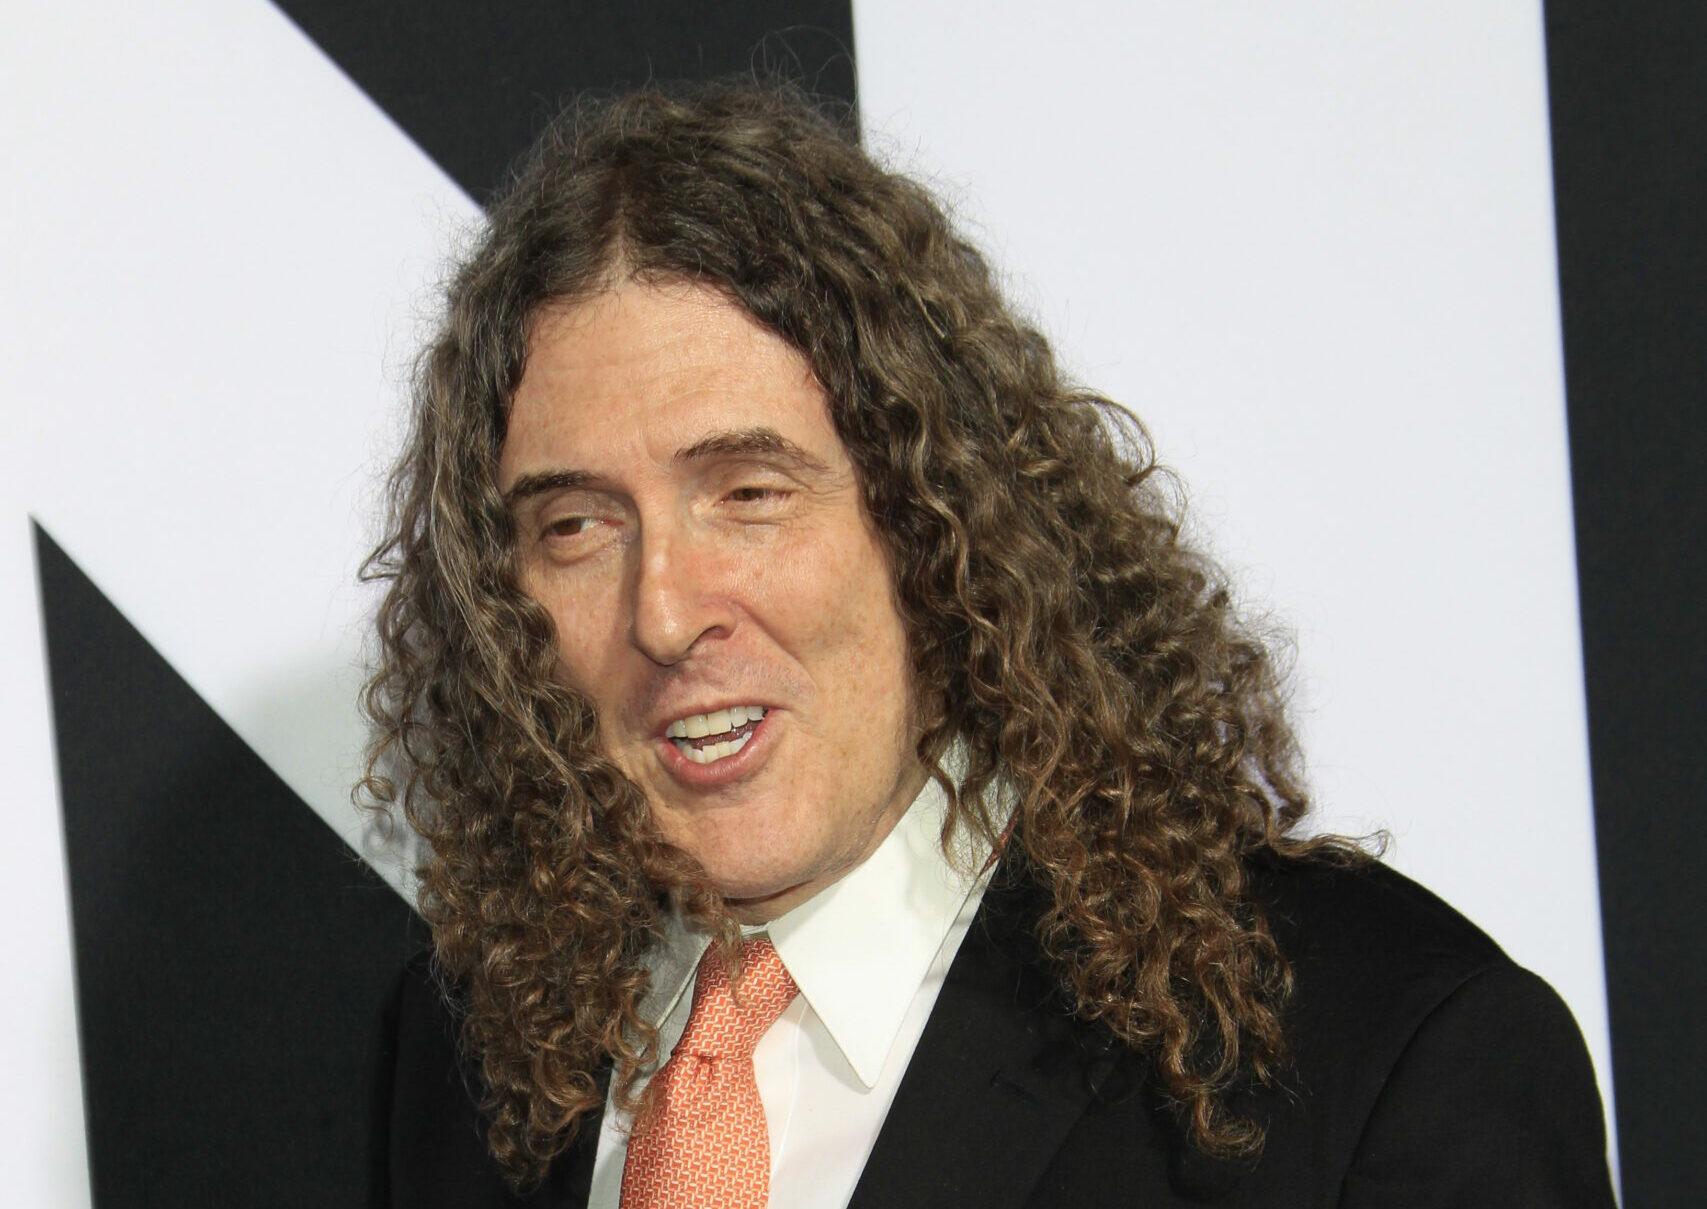 Weird Al Yankovic at the "Halloween" Premiere at the TCL Chinese Theater